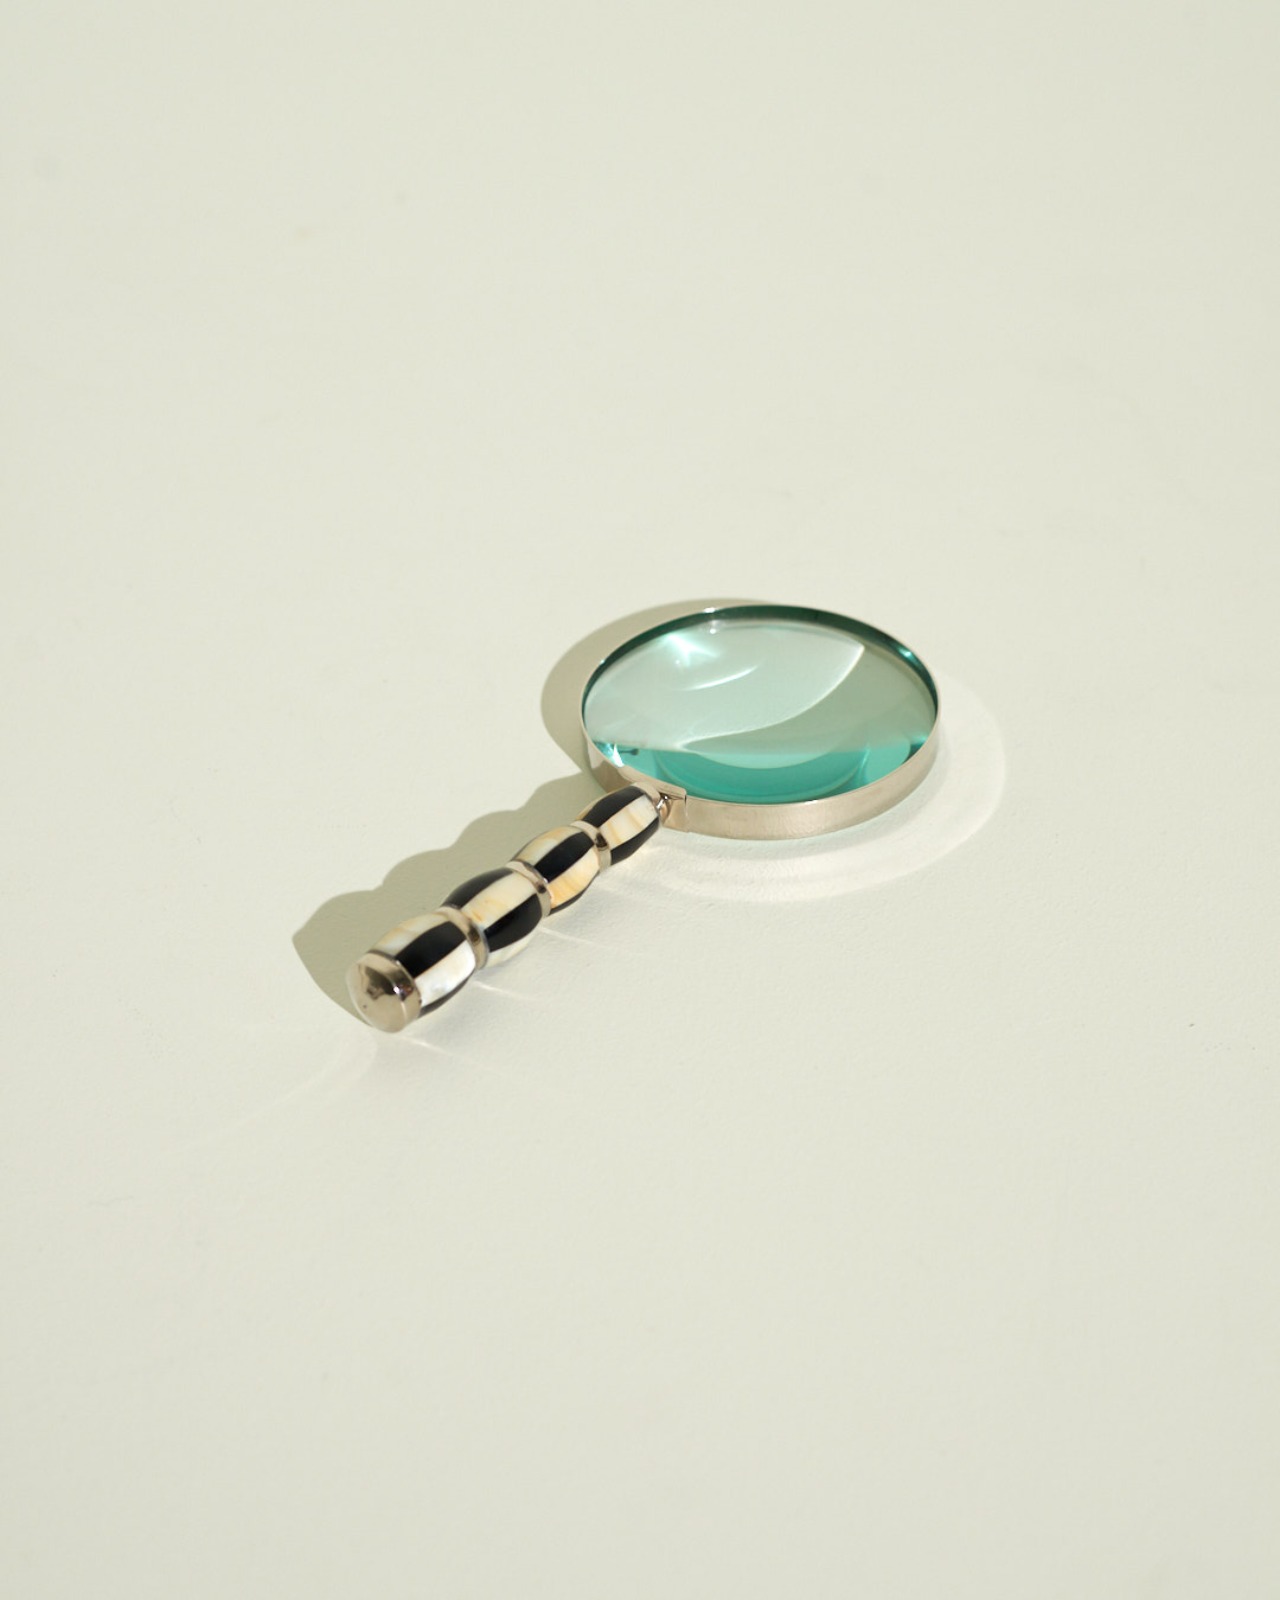 Perl Grip Magnifying Glass